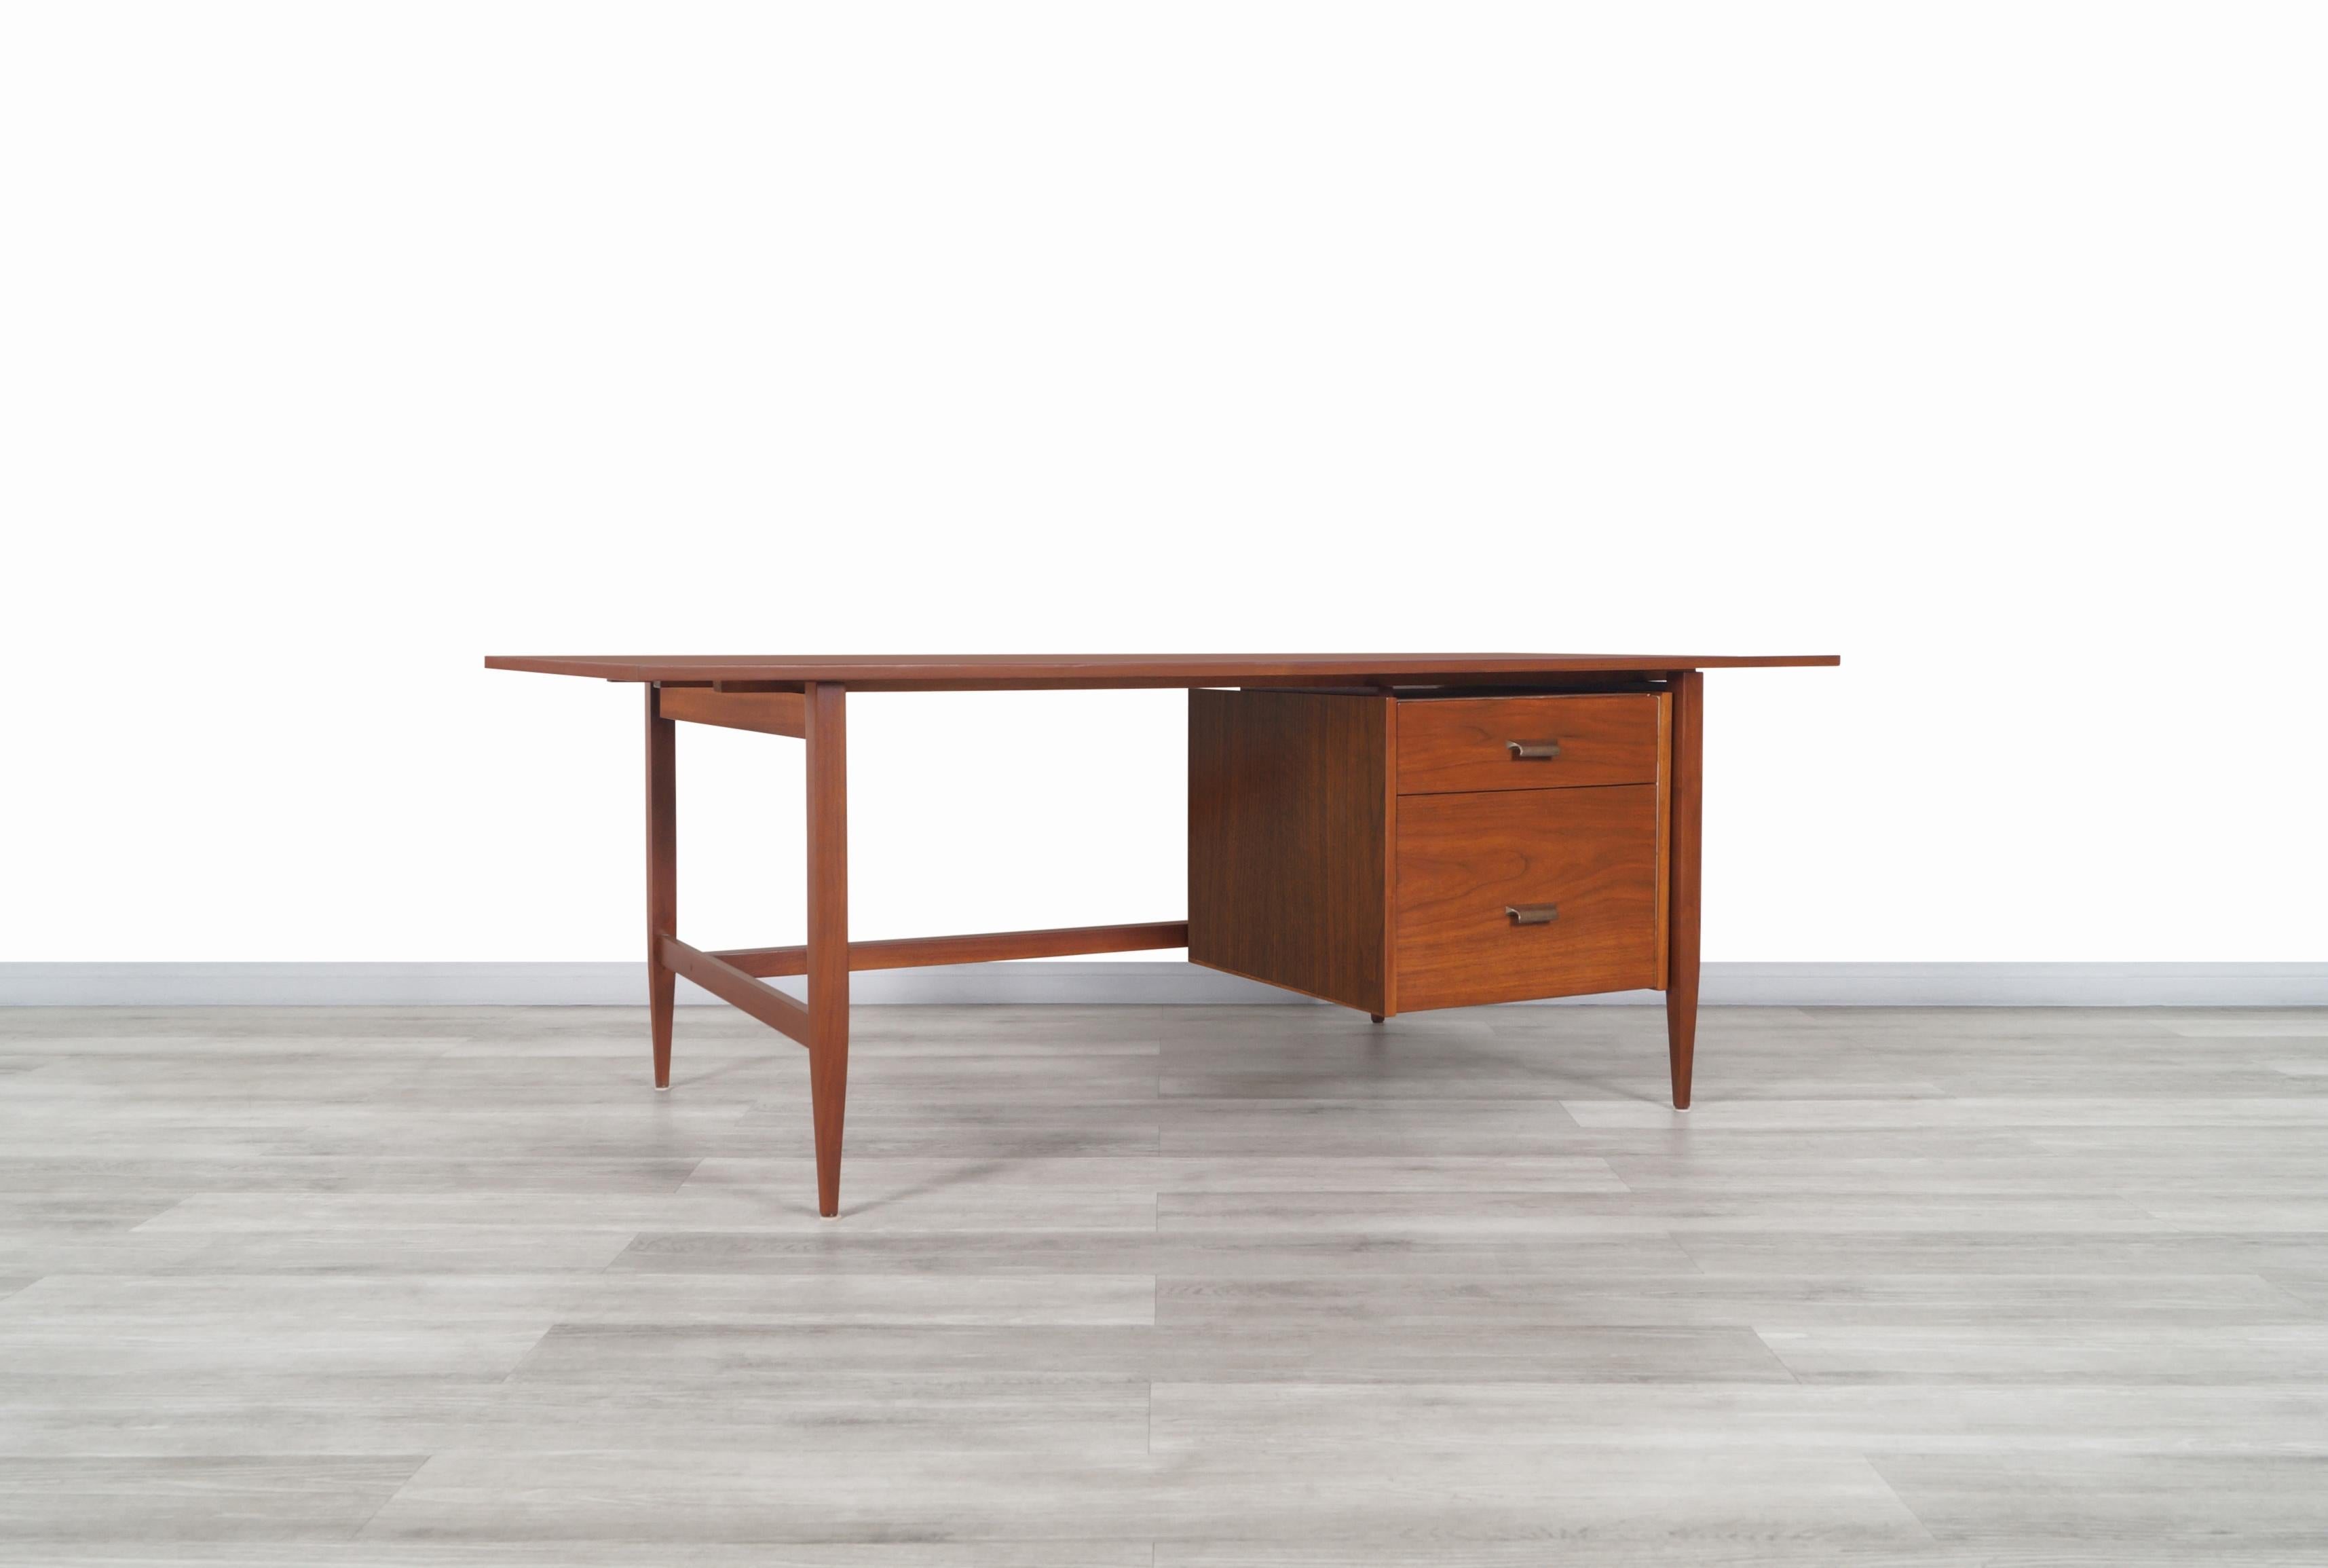 Fabulous mid-century executive walnut desk designed and manufactured in the United States, circa 1960s. This desk has been constructed from the highest quality walnut wood and features a practical design that perfectly fits any work environment.